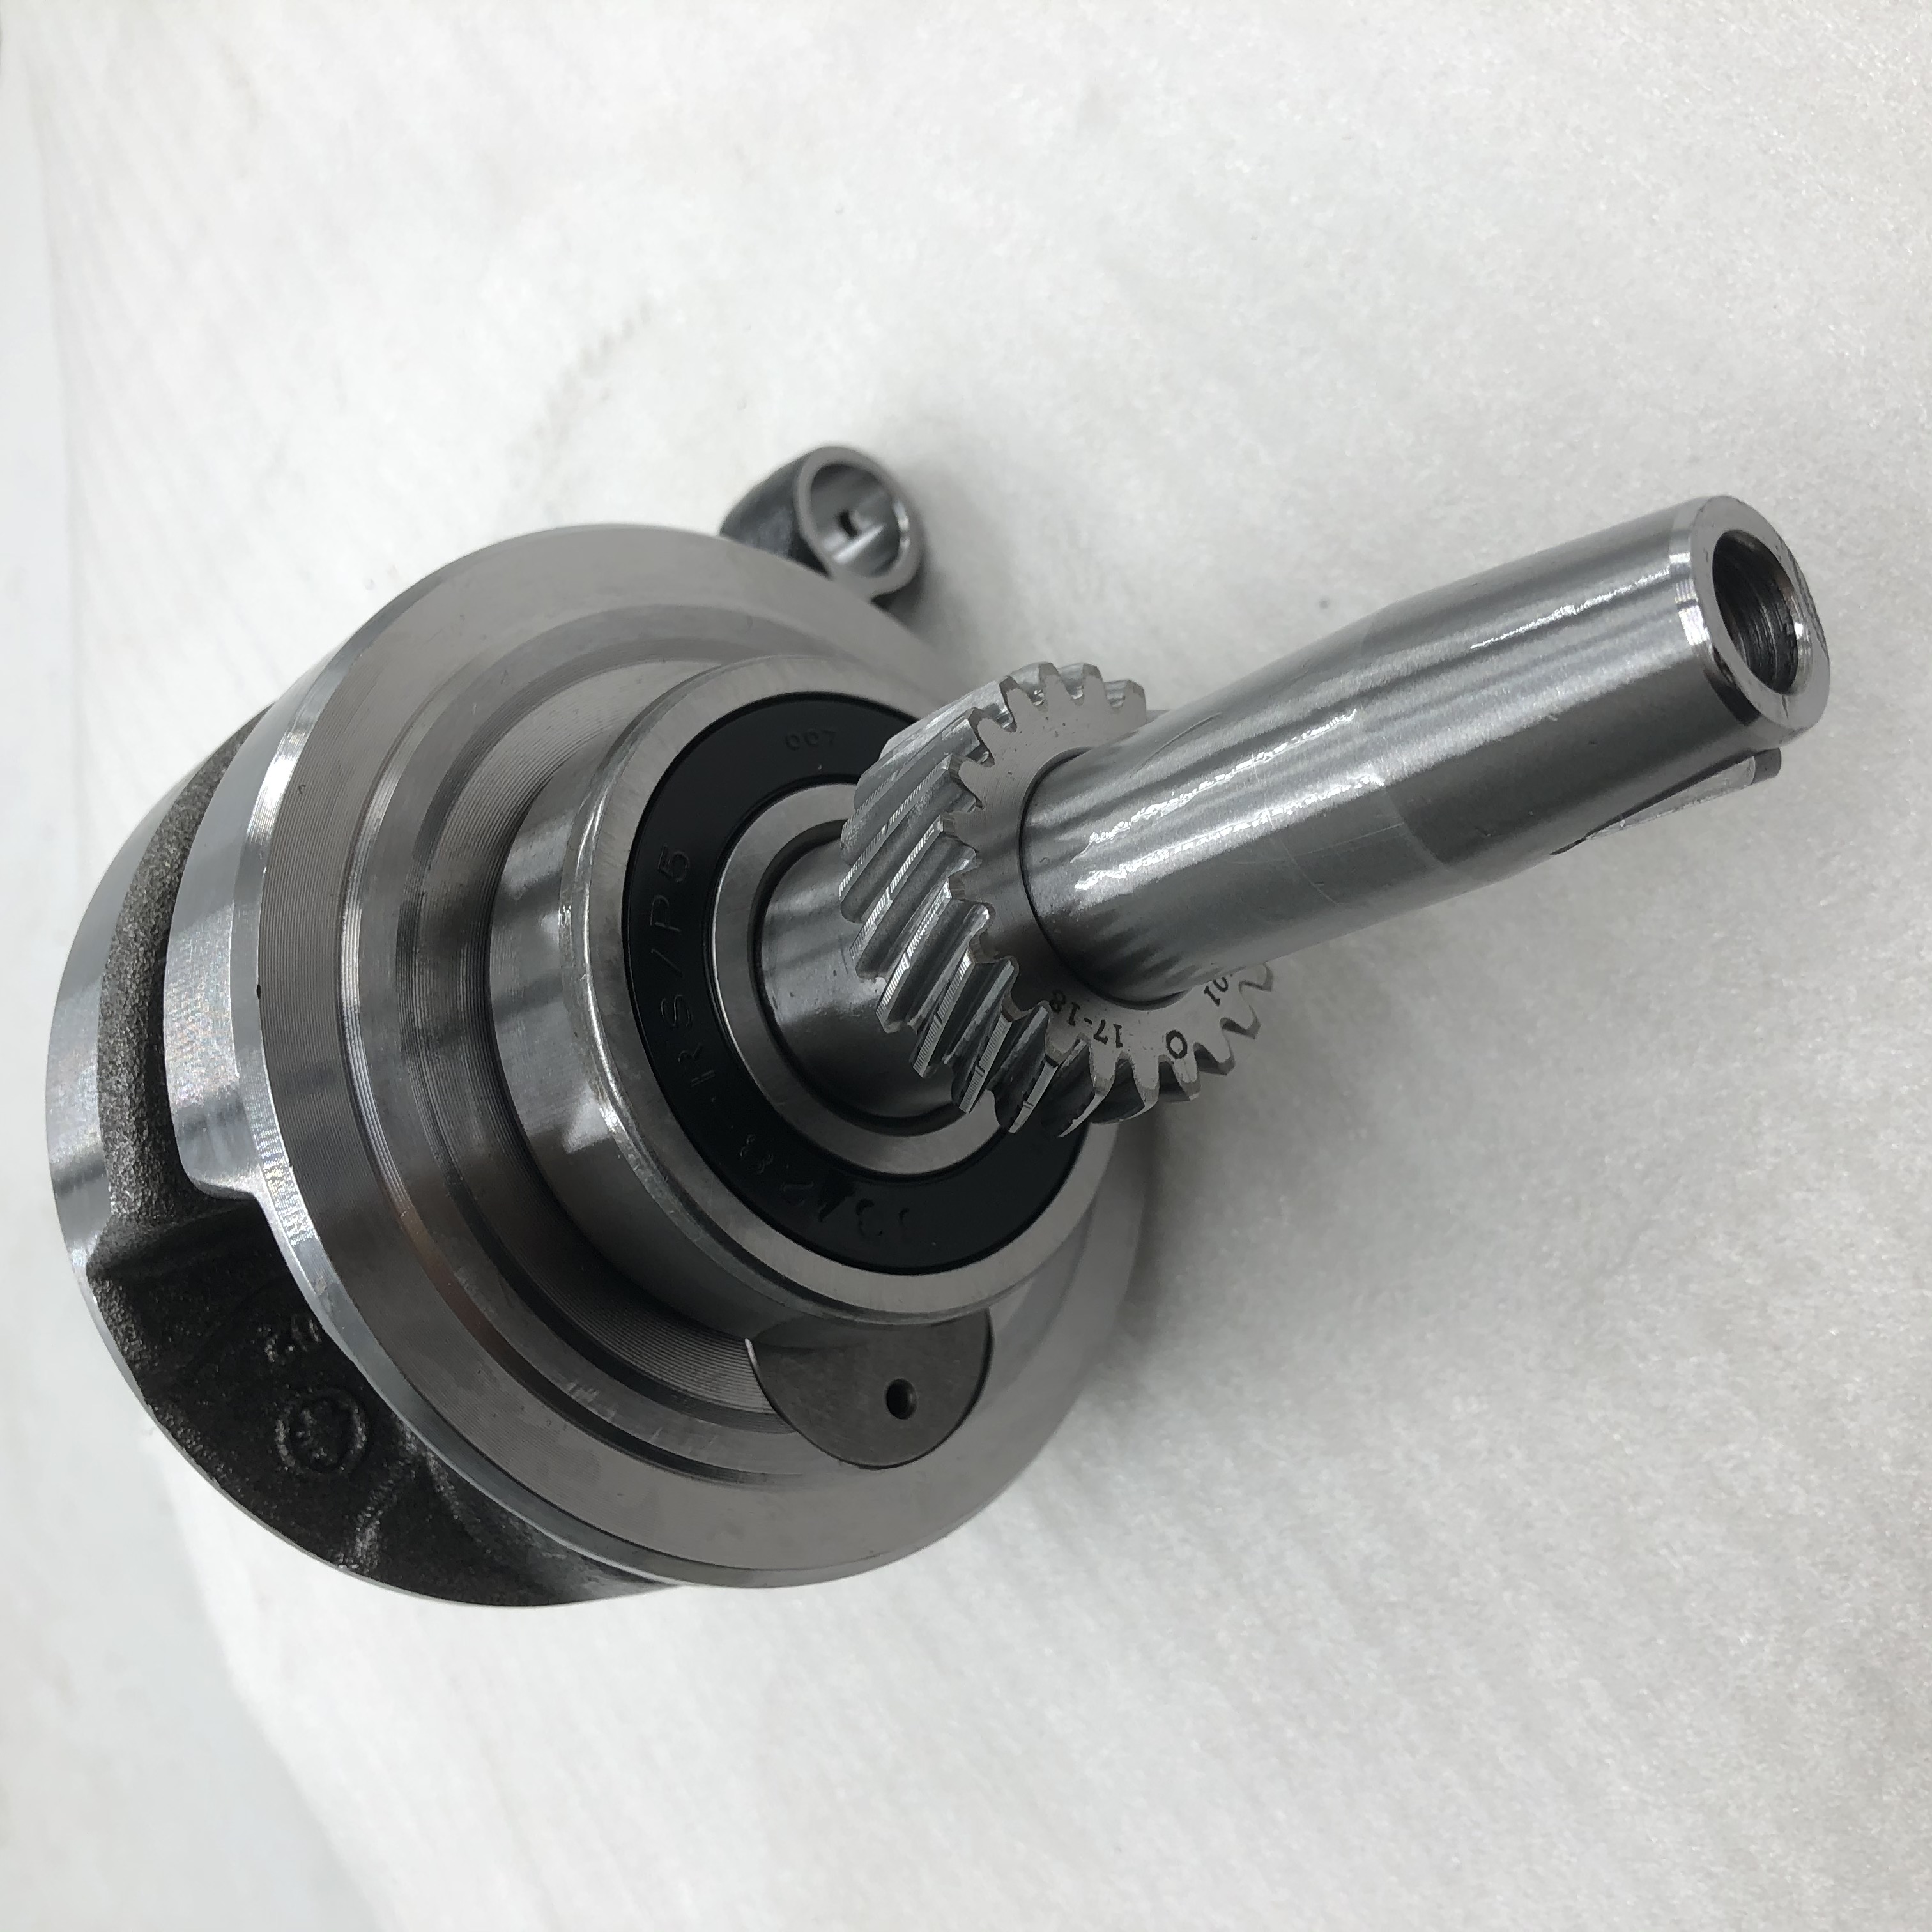 Performance Engine Parts Forged Steel Motorcycle Crankshaft For DAYANG tricycle three wheels motorcycle engine parts Crankshaft